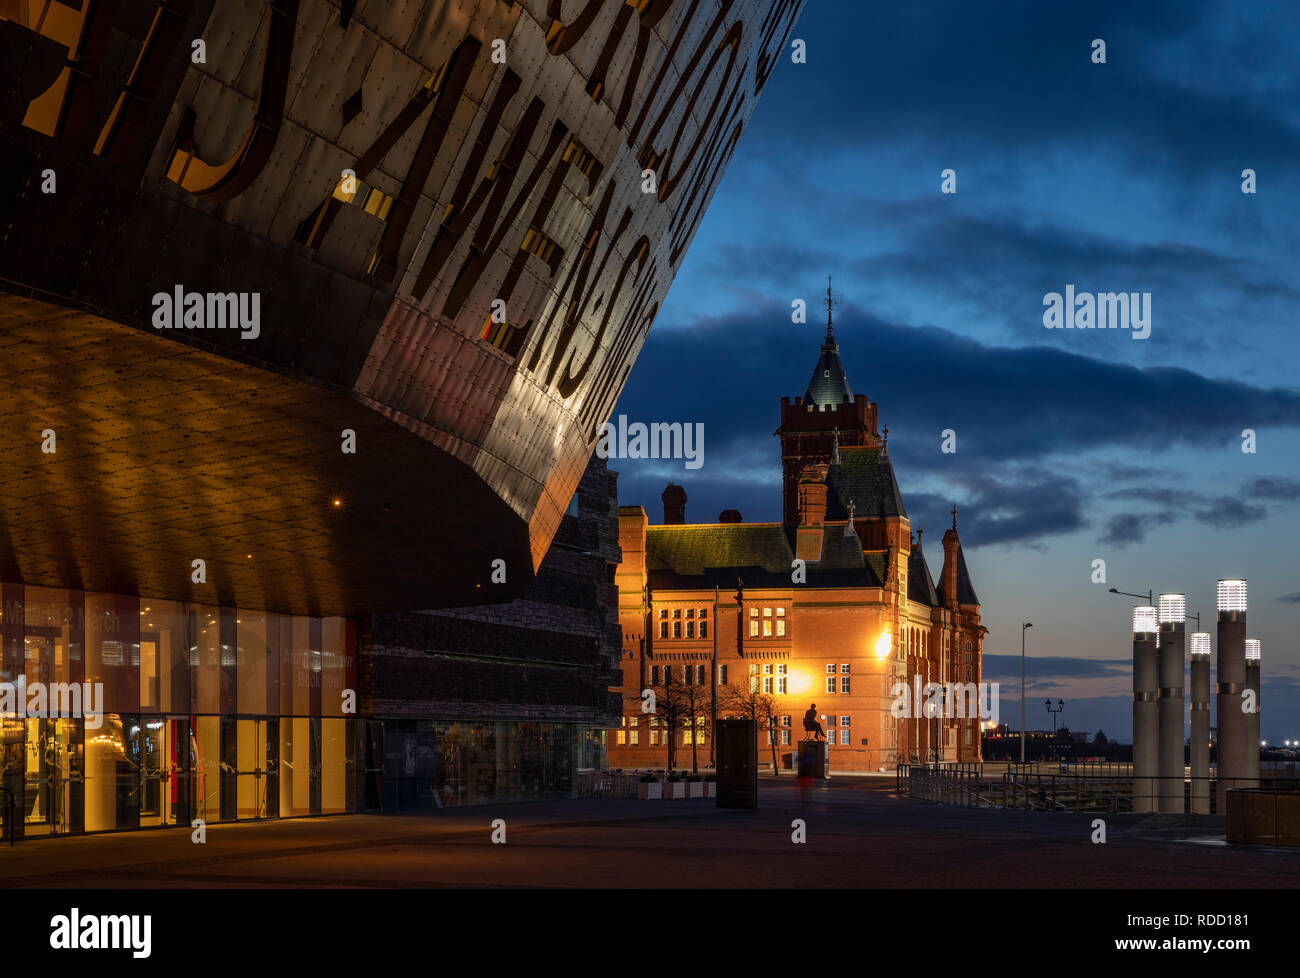 Wales Millennium Centre and The Pierhead building at dawn from Roald Dahl Plass, Cardiff Bay, Wales Stock Photo